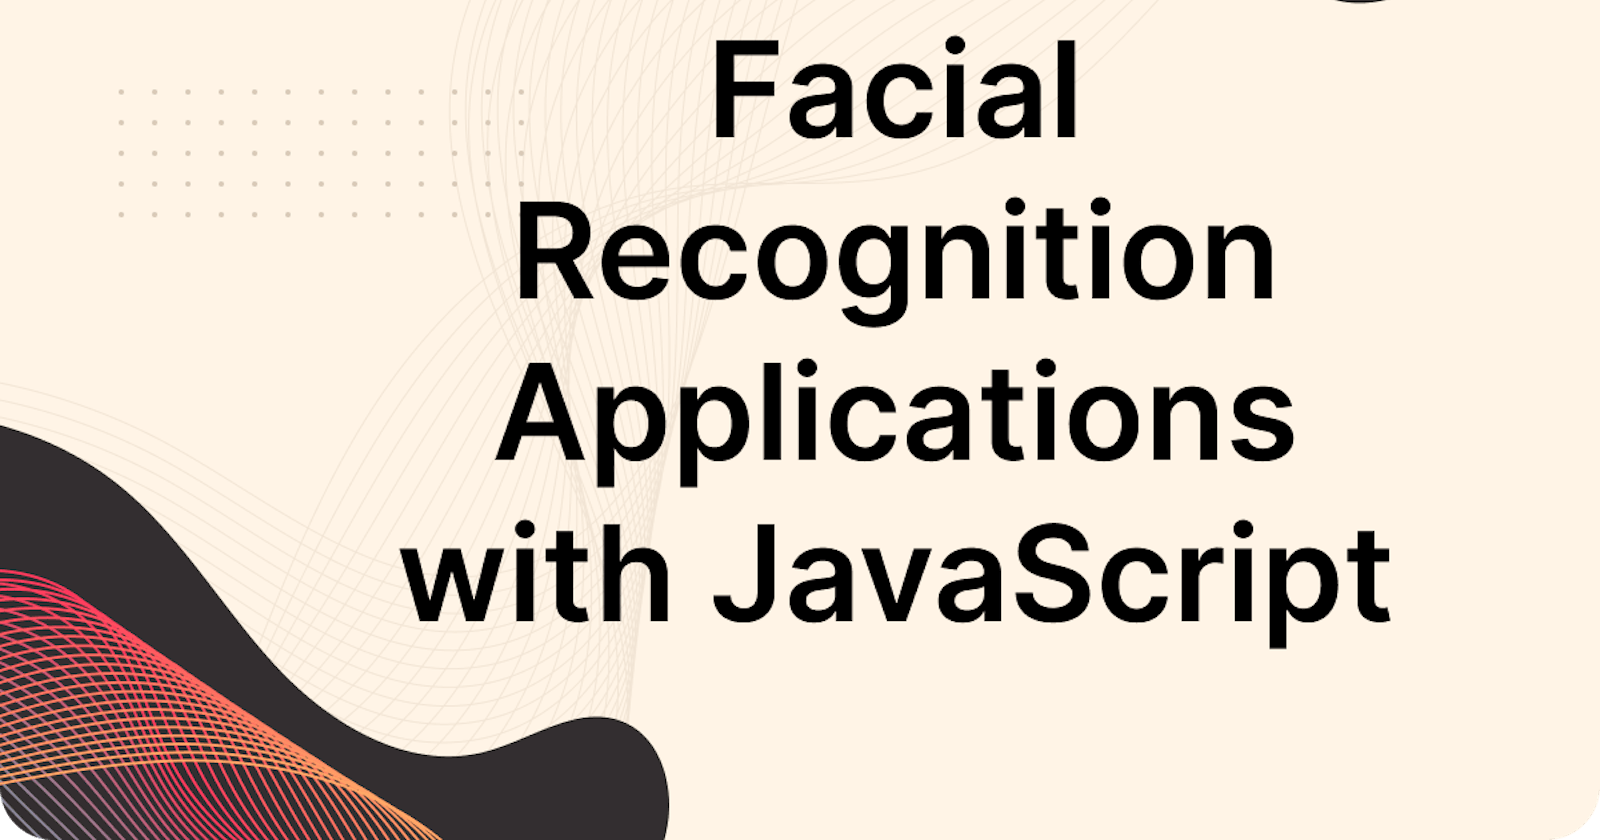 How to Build a Facial Recognition Application with JavaScript